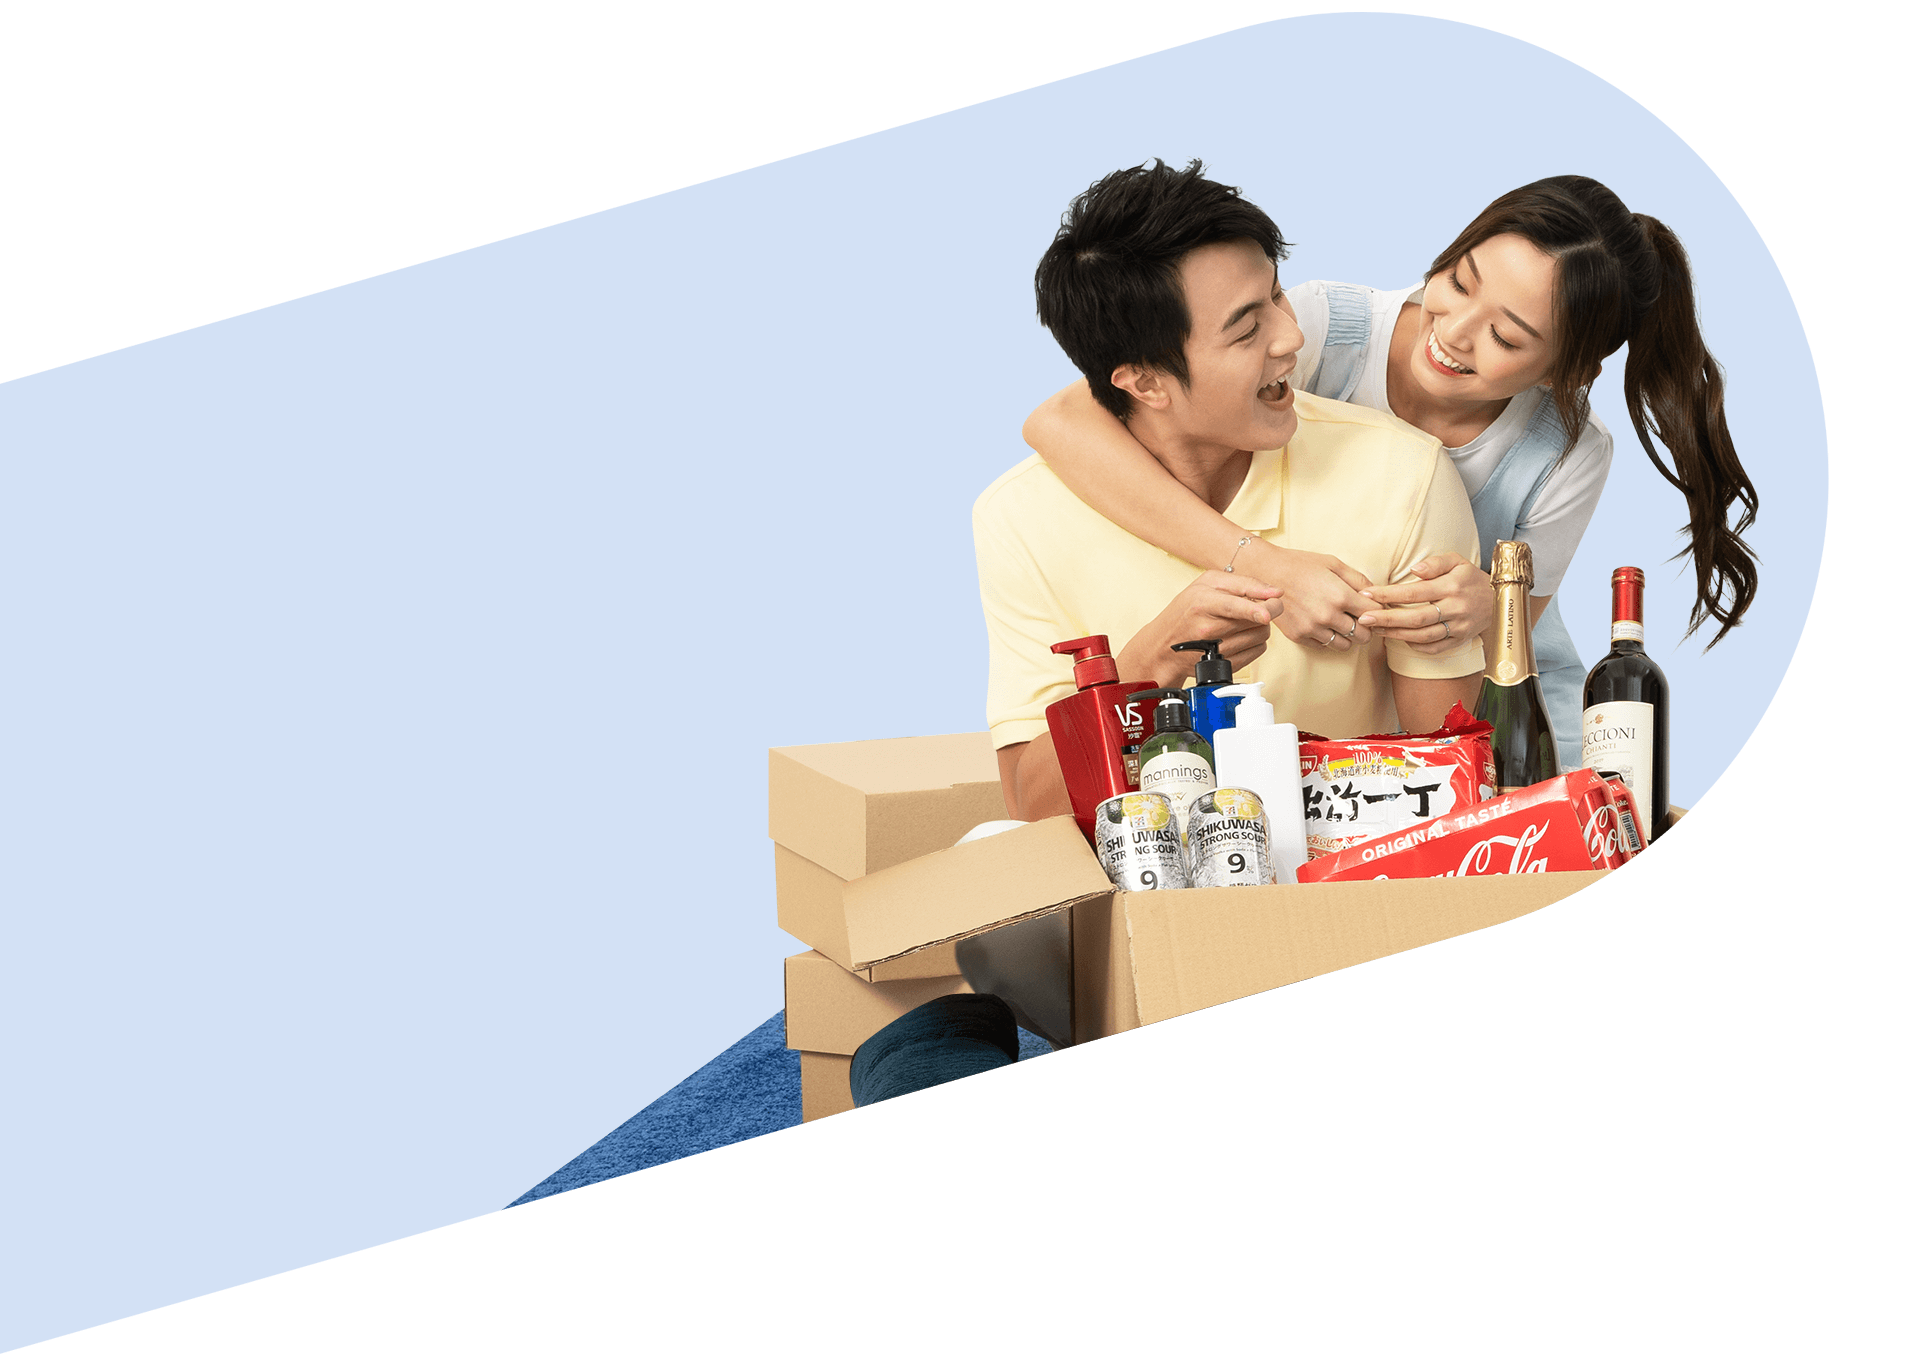 yuu Everything you need, delivered right to your door